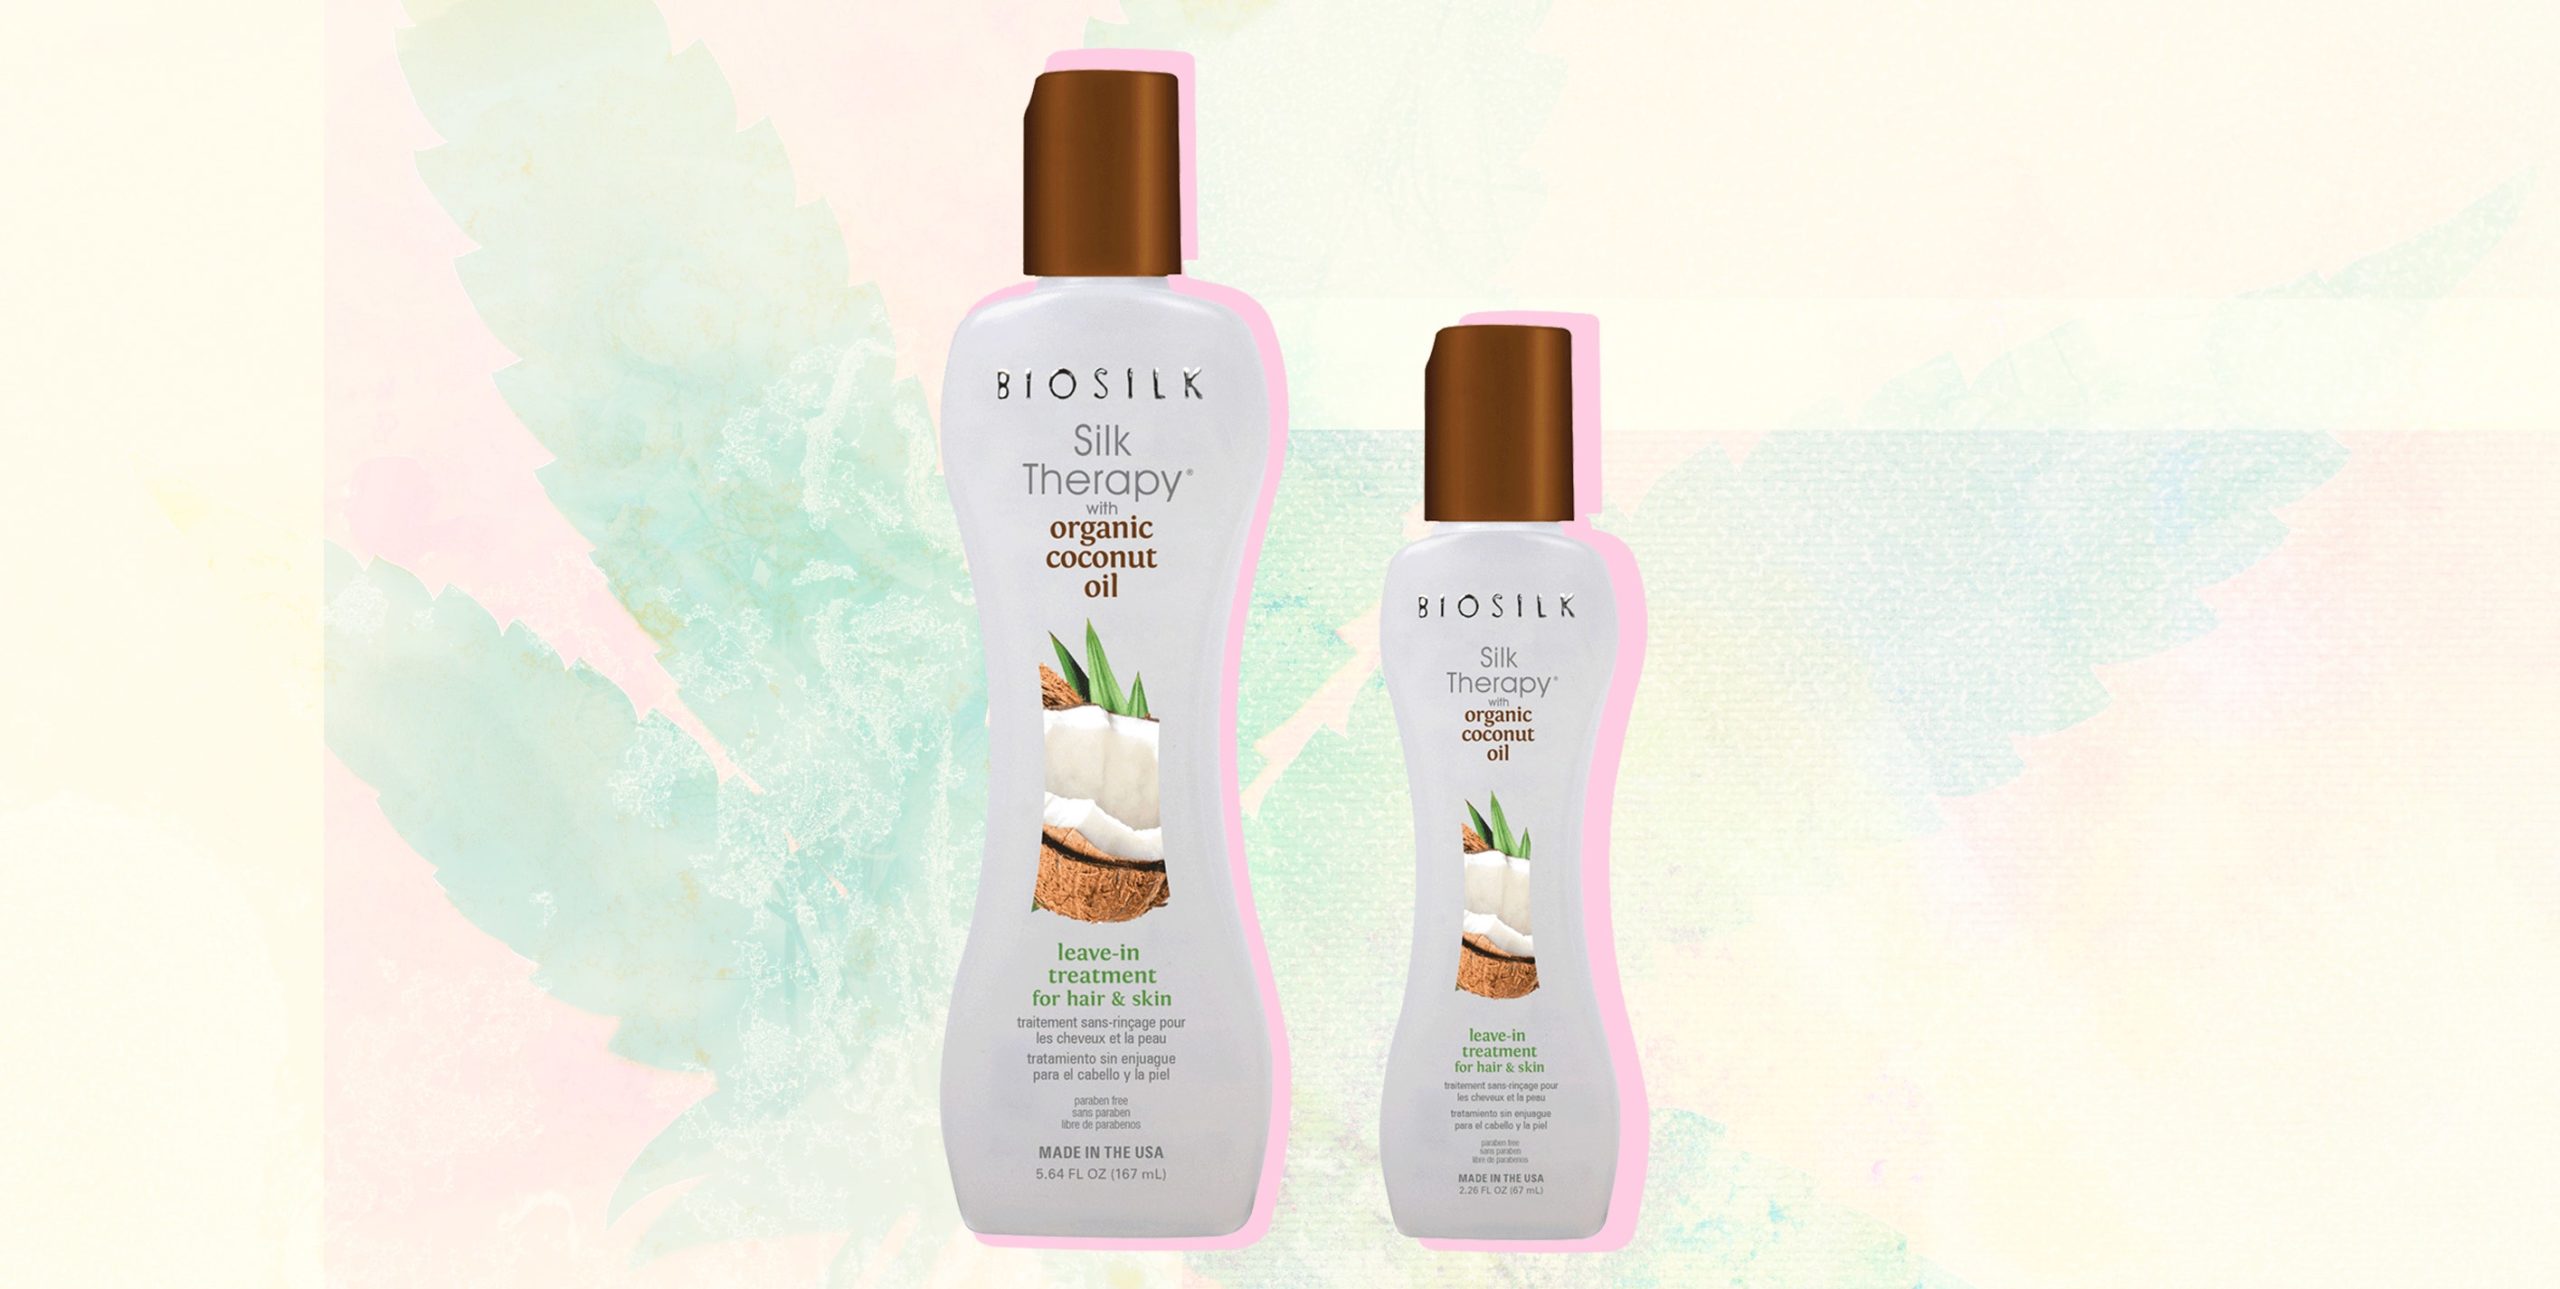 BioSilk Launches New Silk Therapy Hair Serum With Coconut Oil